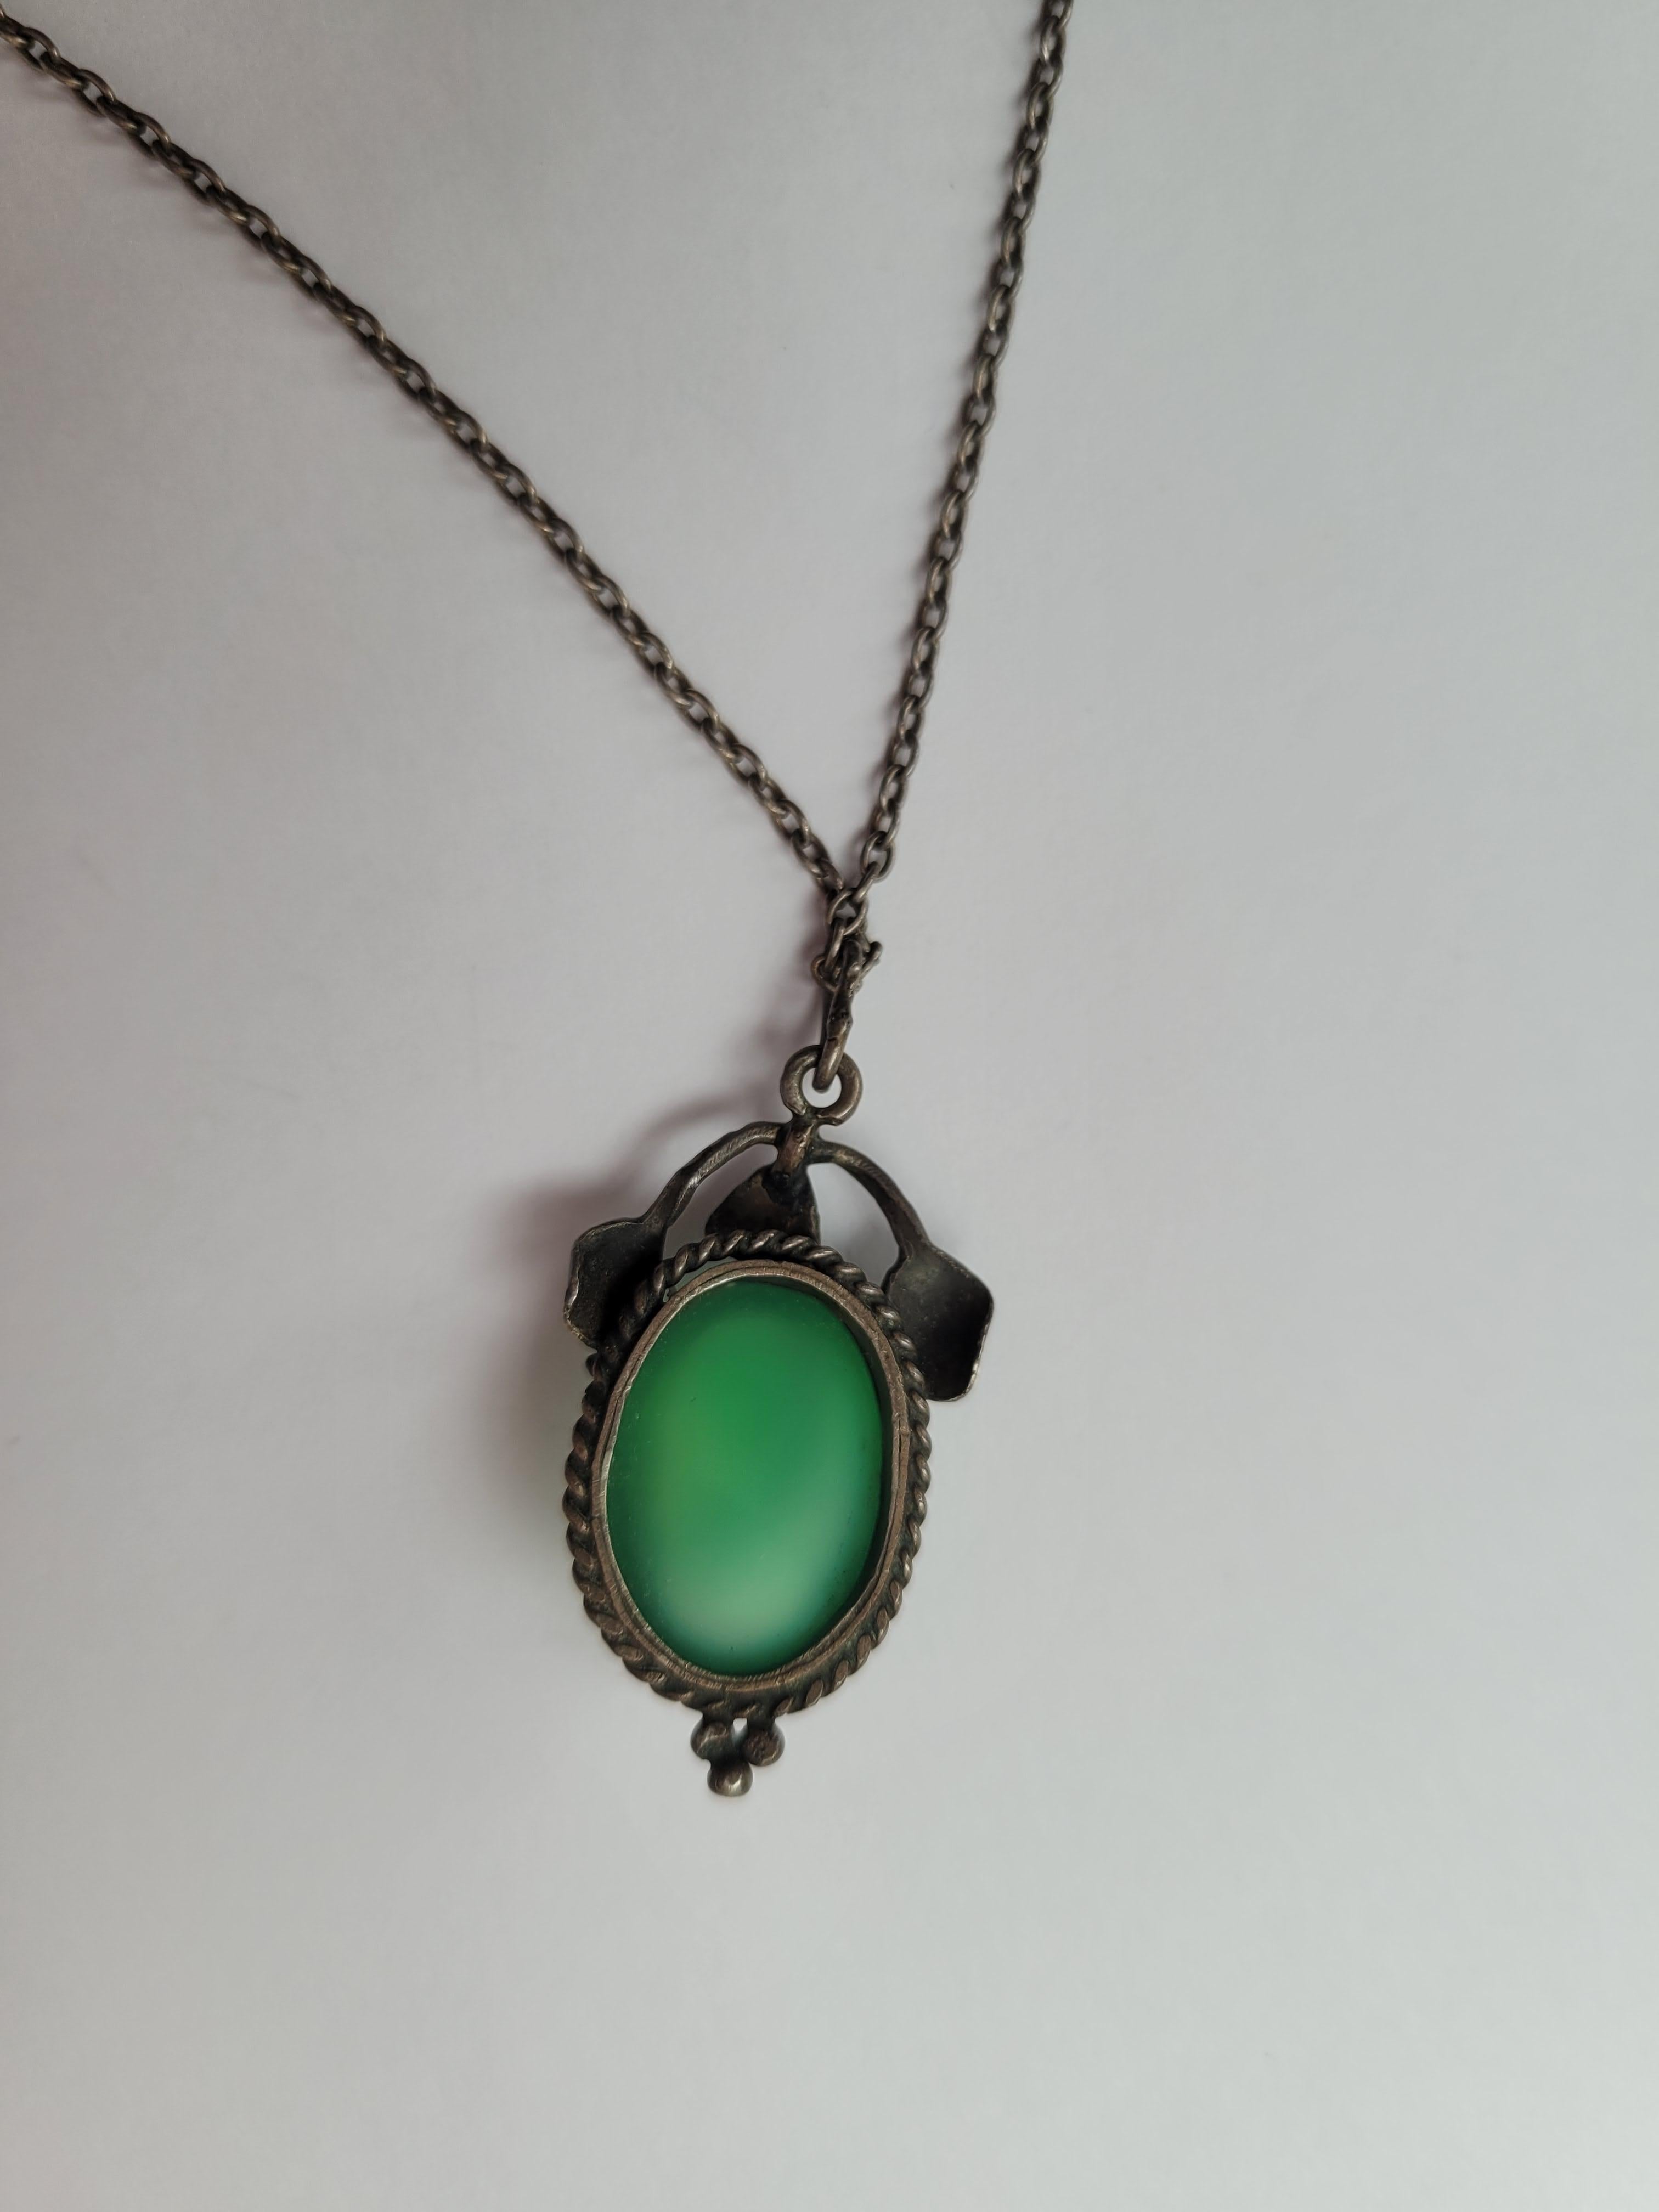 Women's Arts & Crafts c.1900s Green Chrysophrase Silver Pendant Necklace For Sale